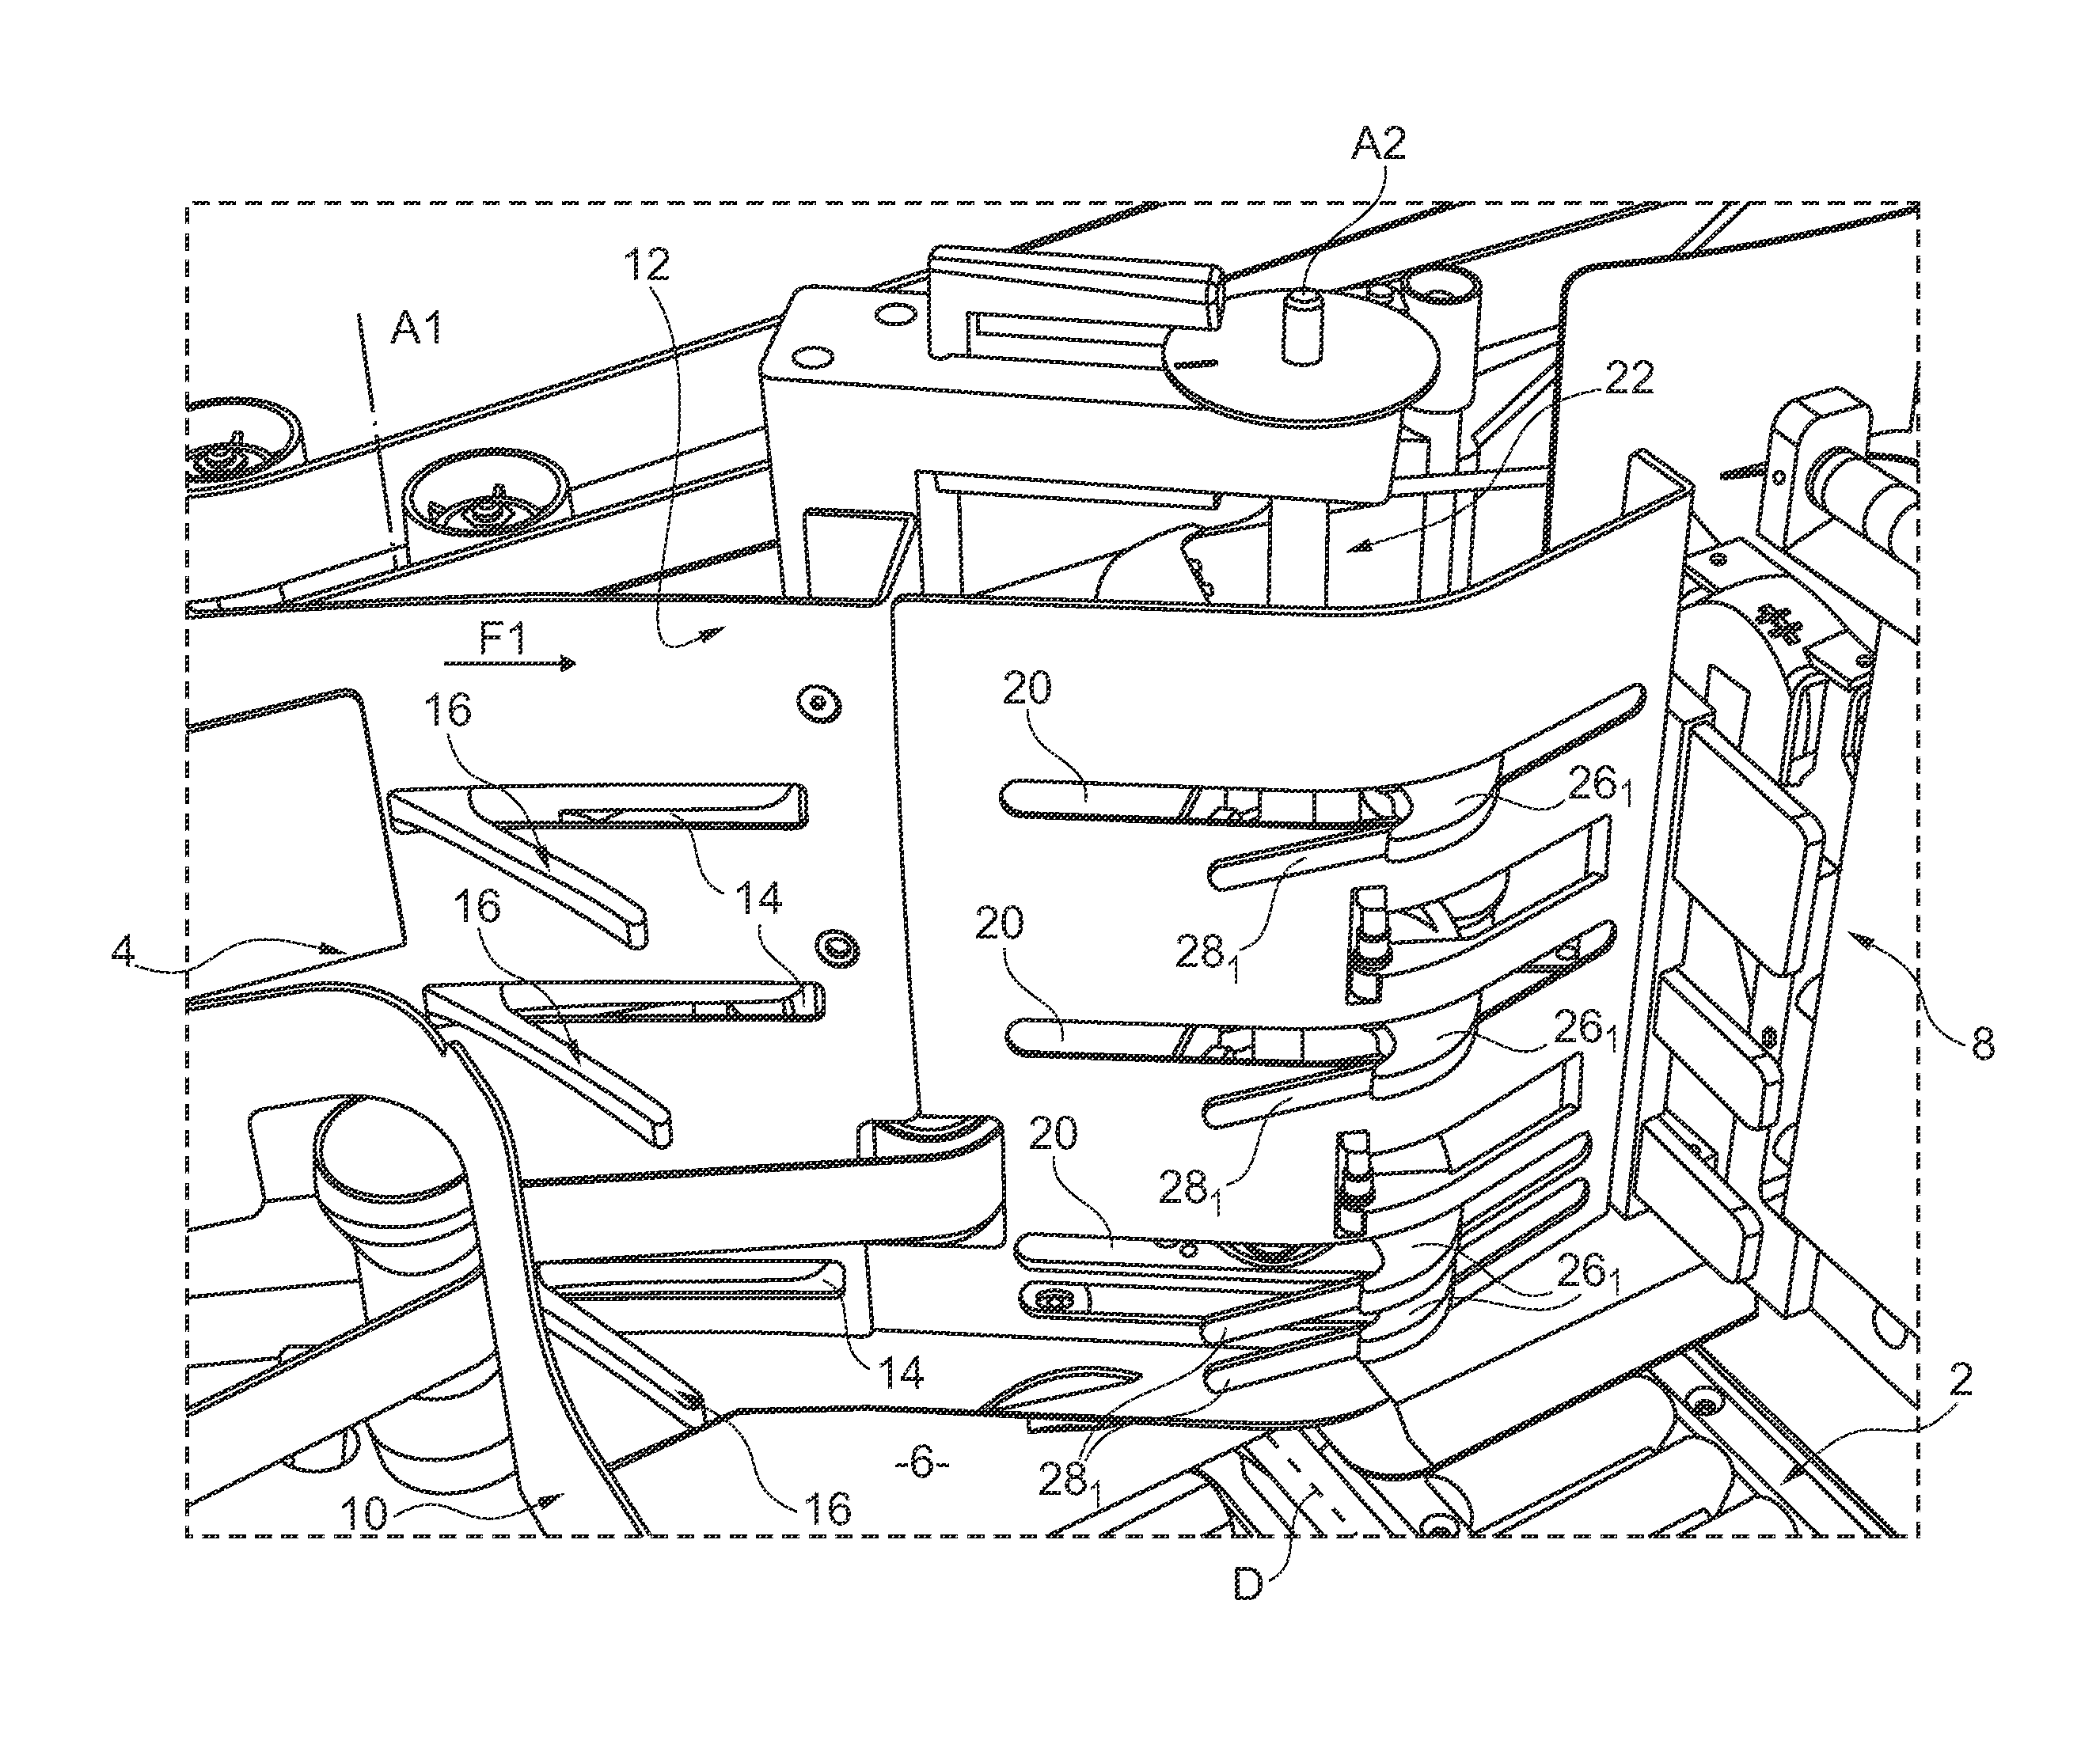 Device for stacking flat articles on edge and a postal sorting machine equipped with at least one such device